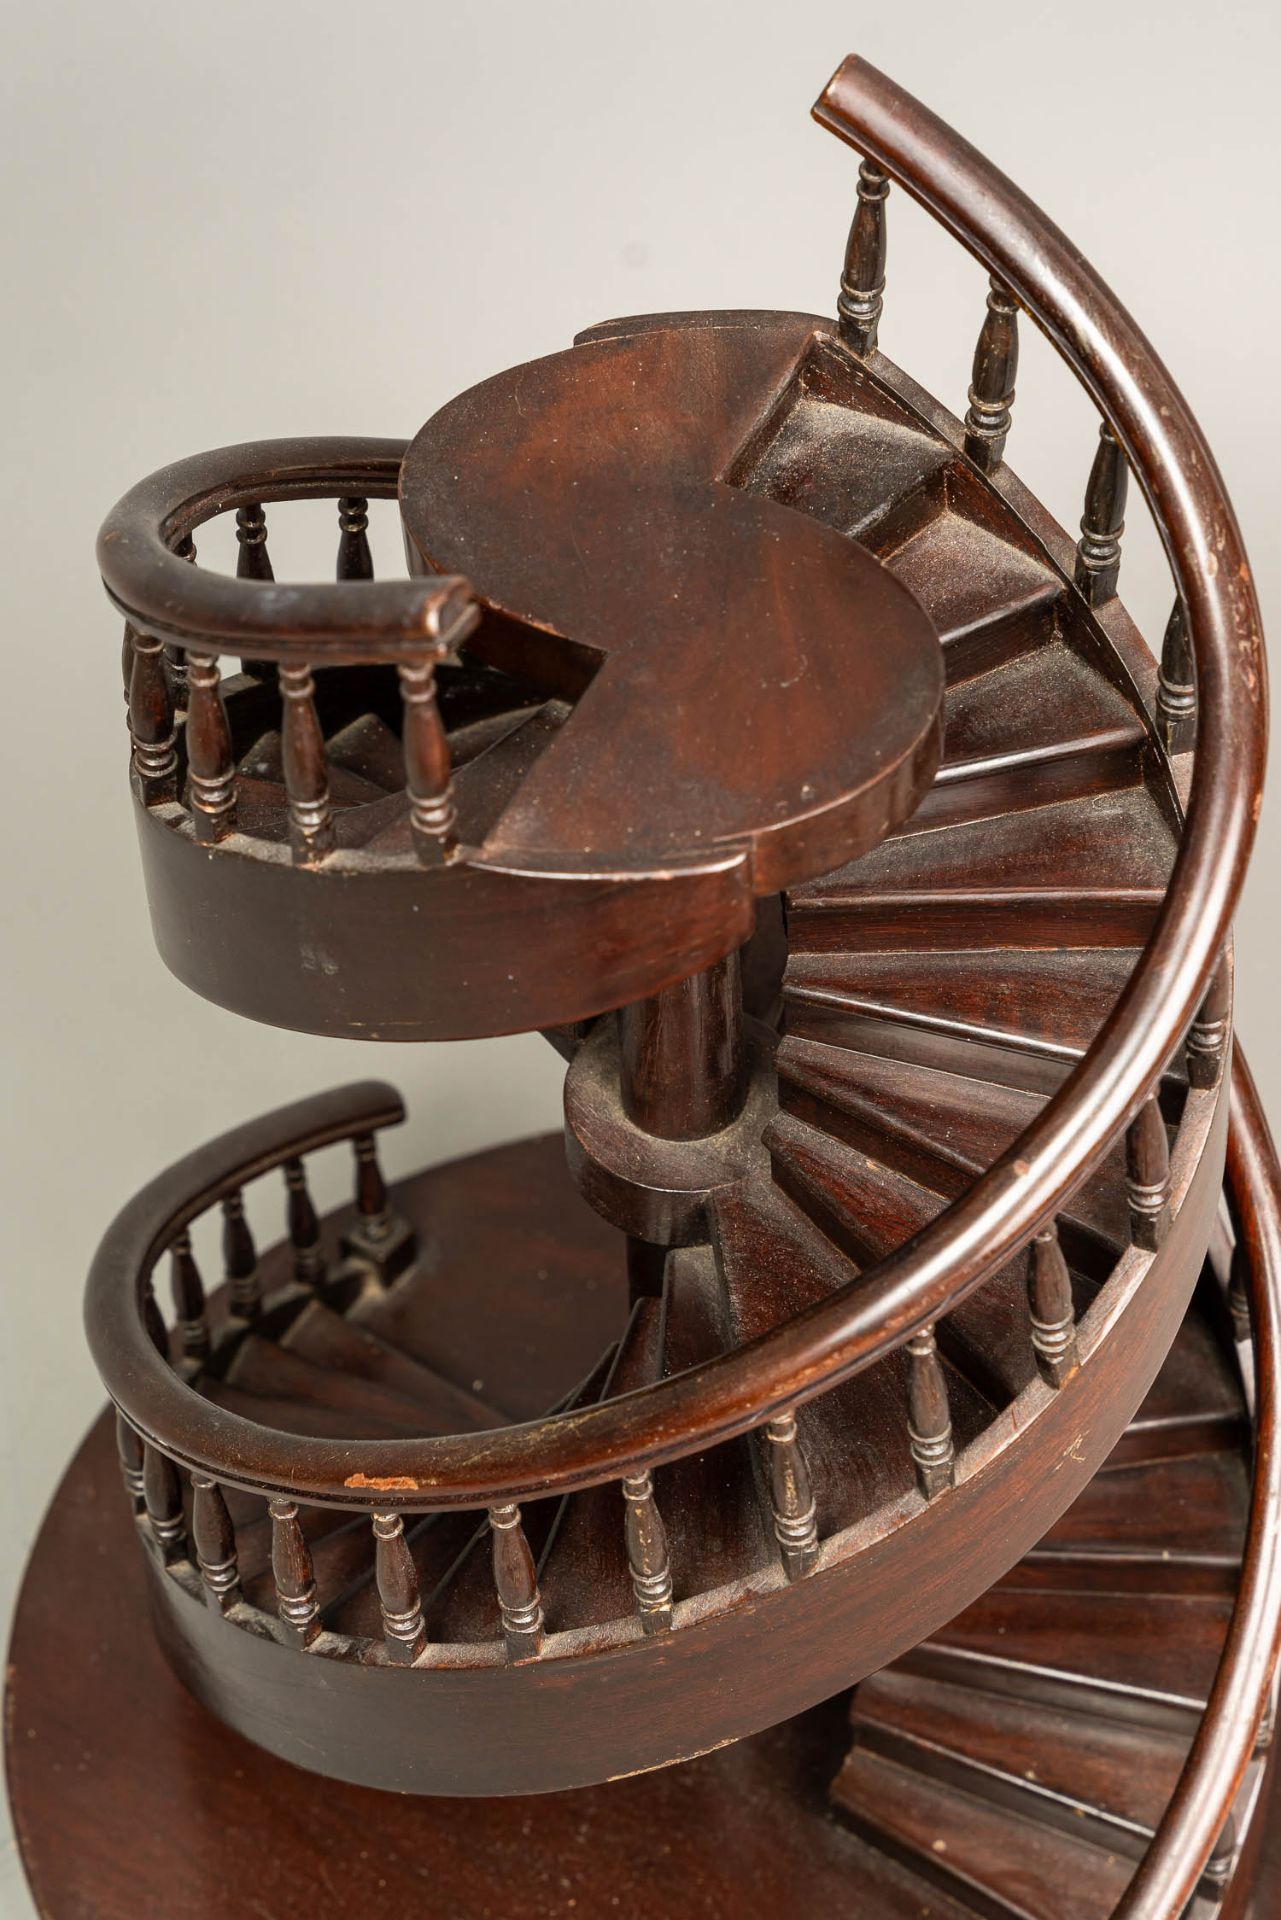 Architectural Model of a Staircase - Image 2 of 3